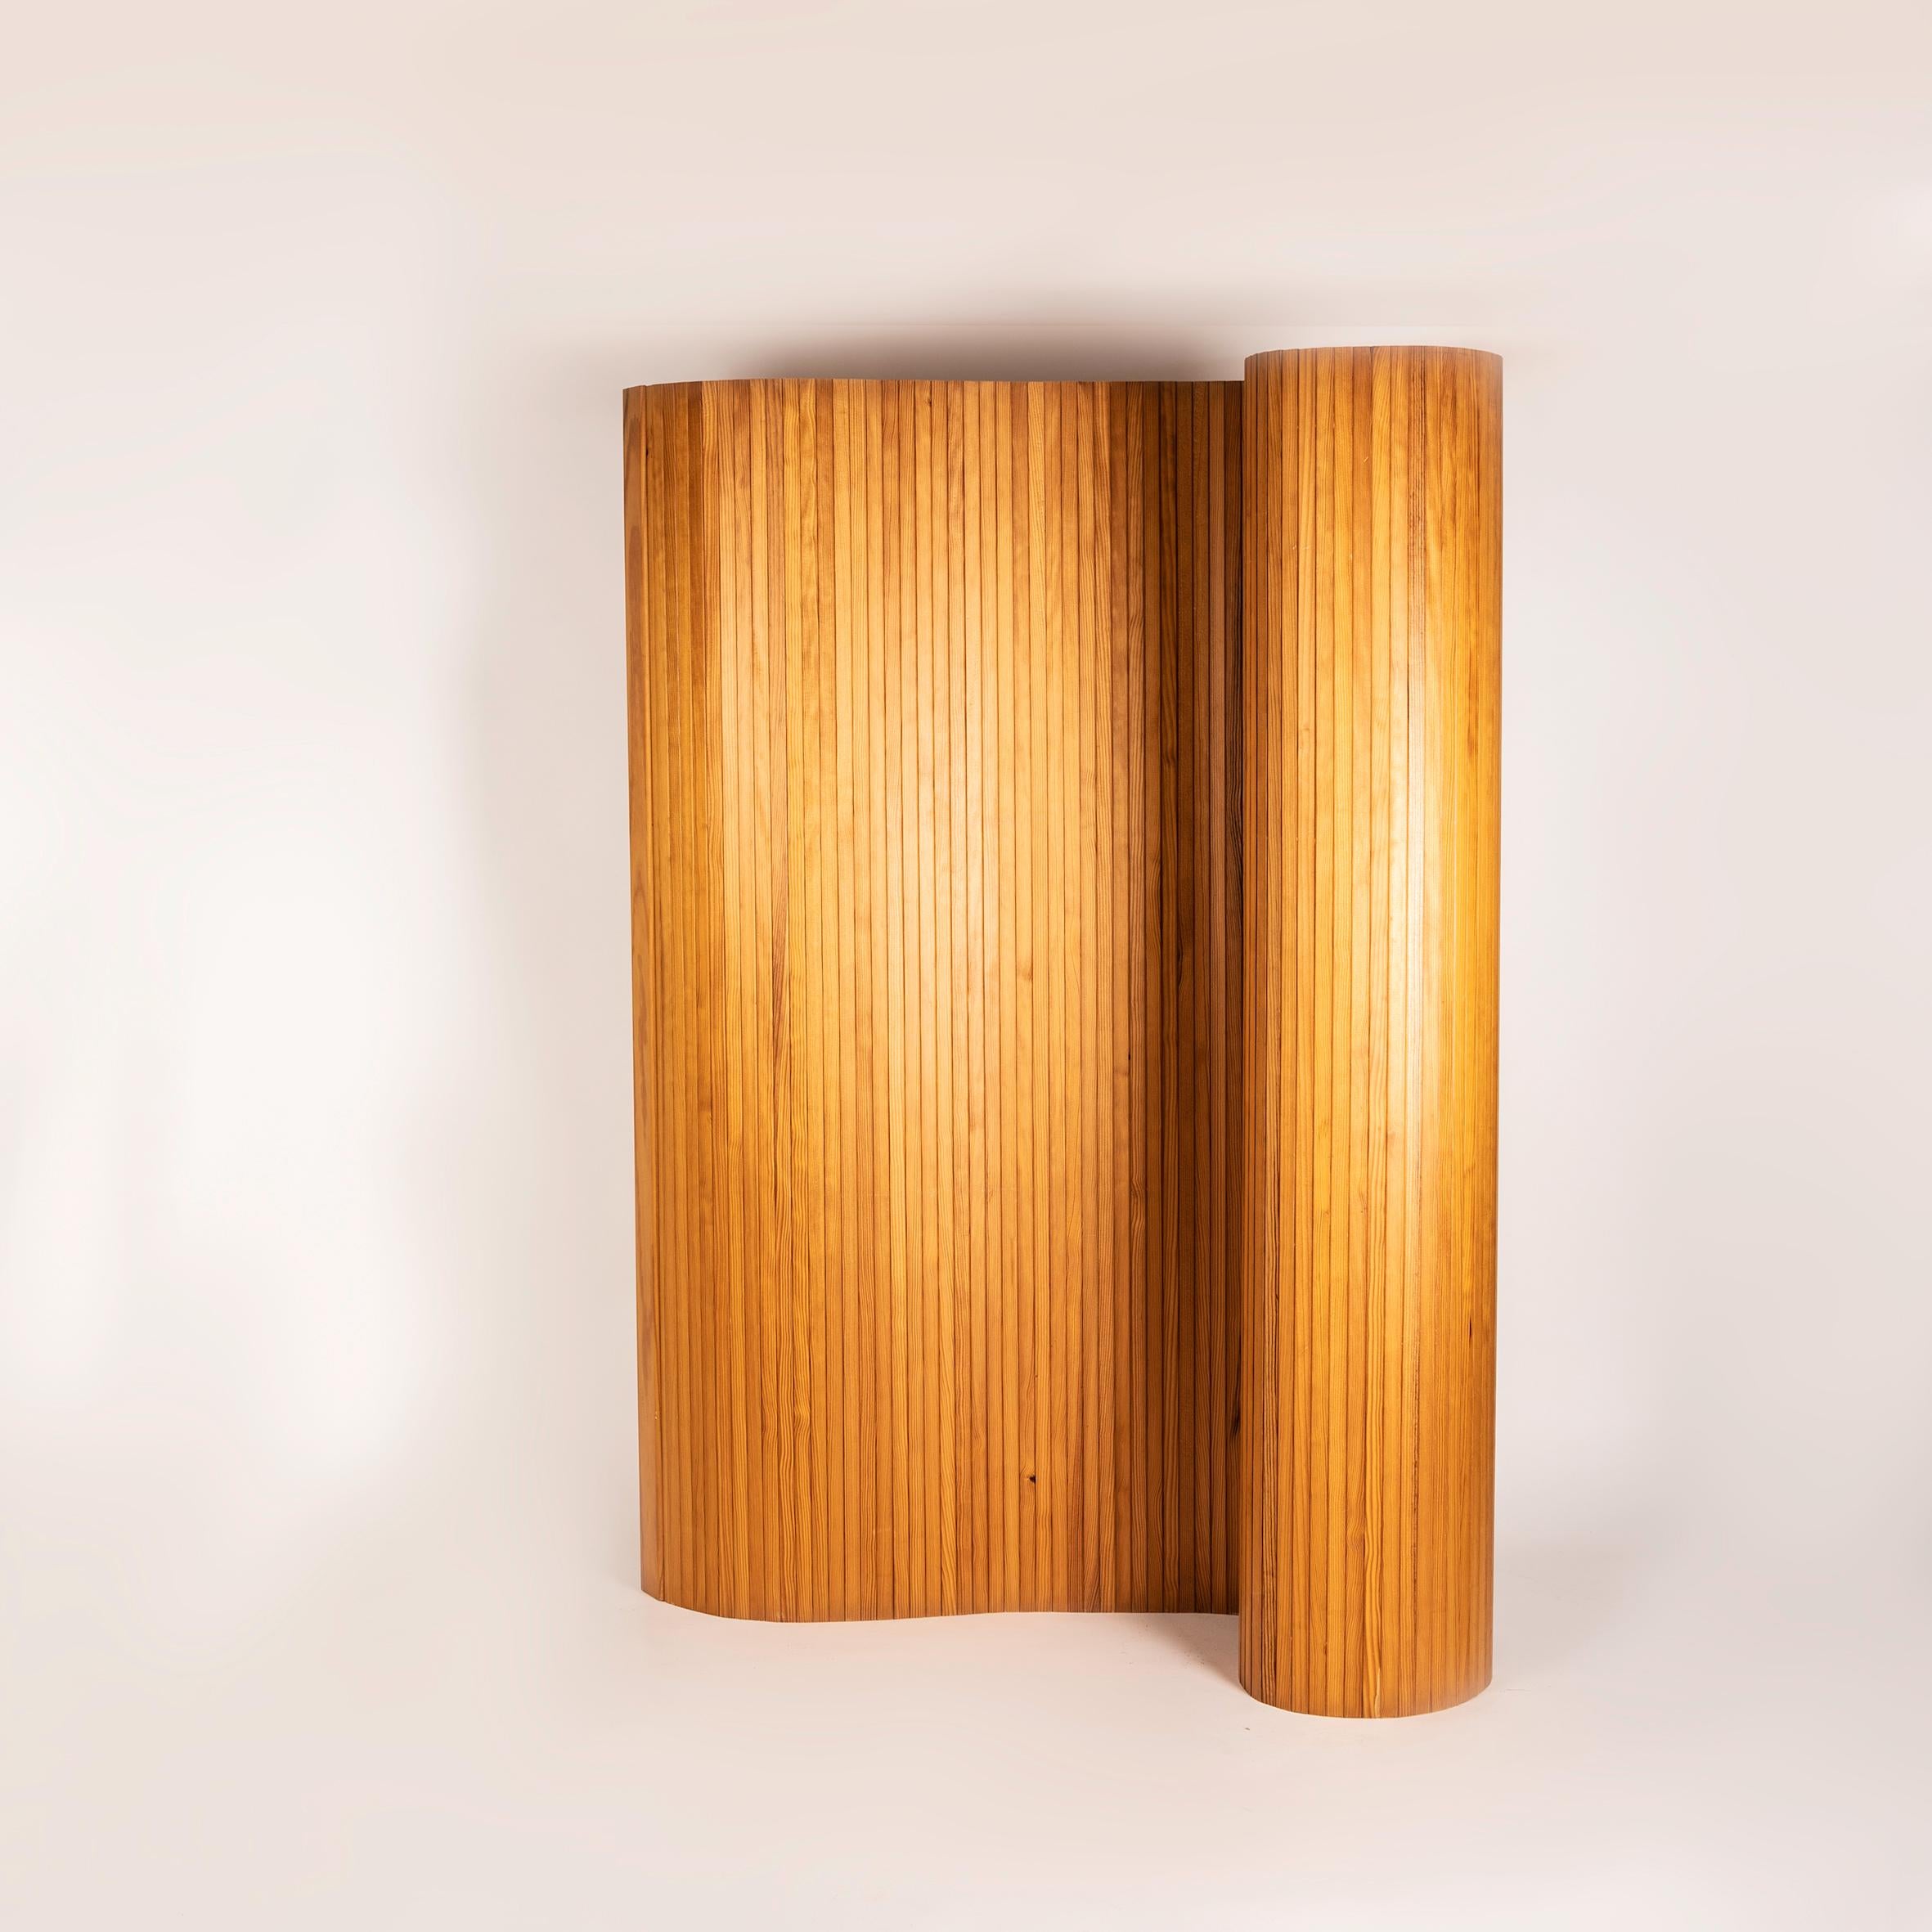 European A Mid-century folding Screen in the style of Alvar Aalto  For Sale